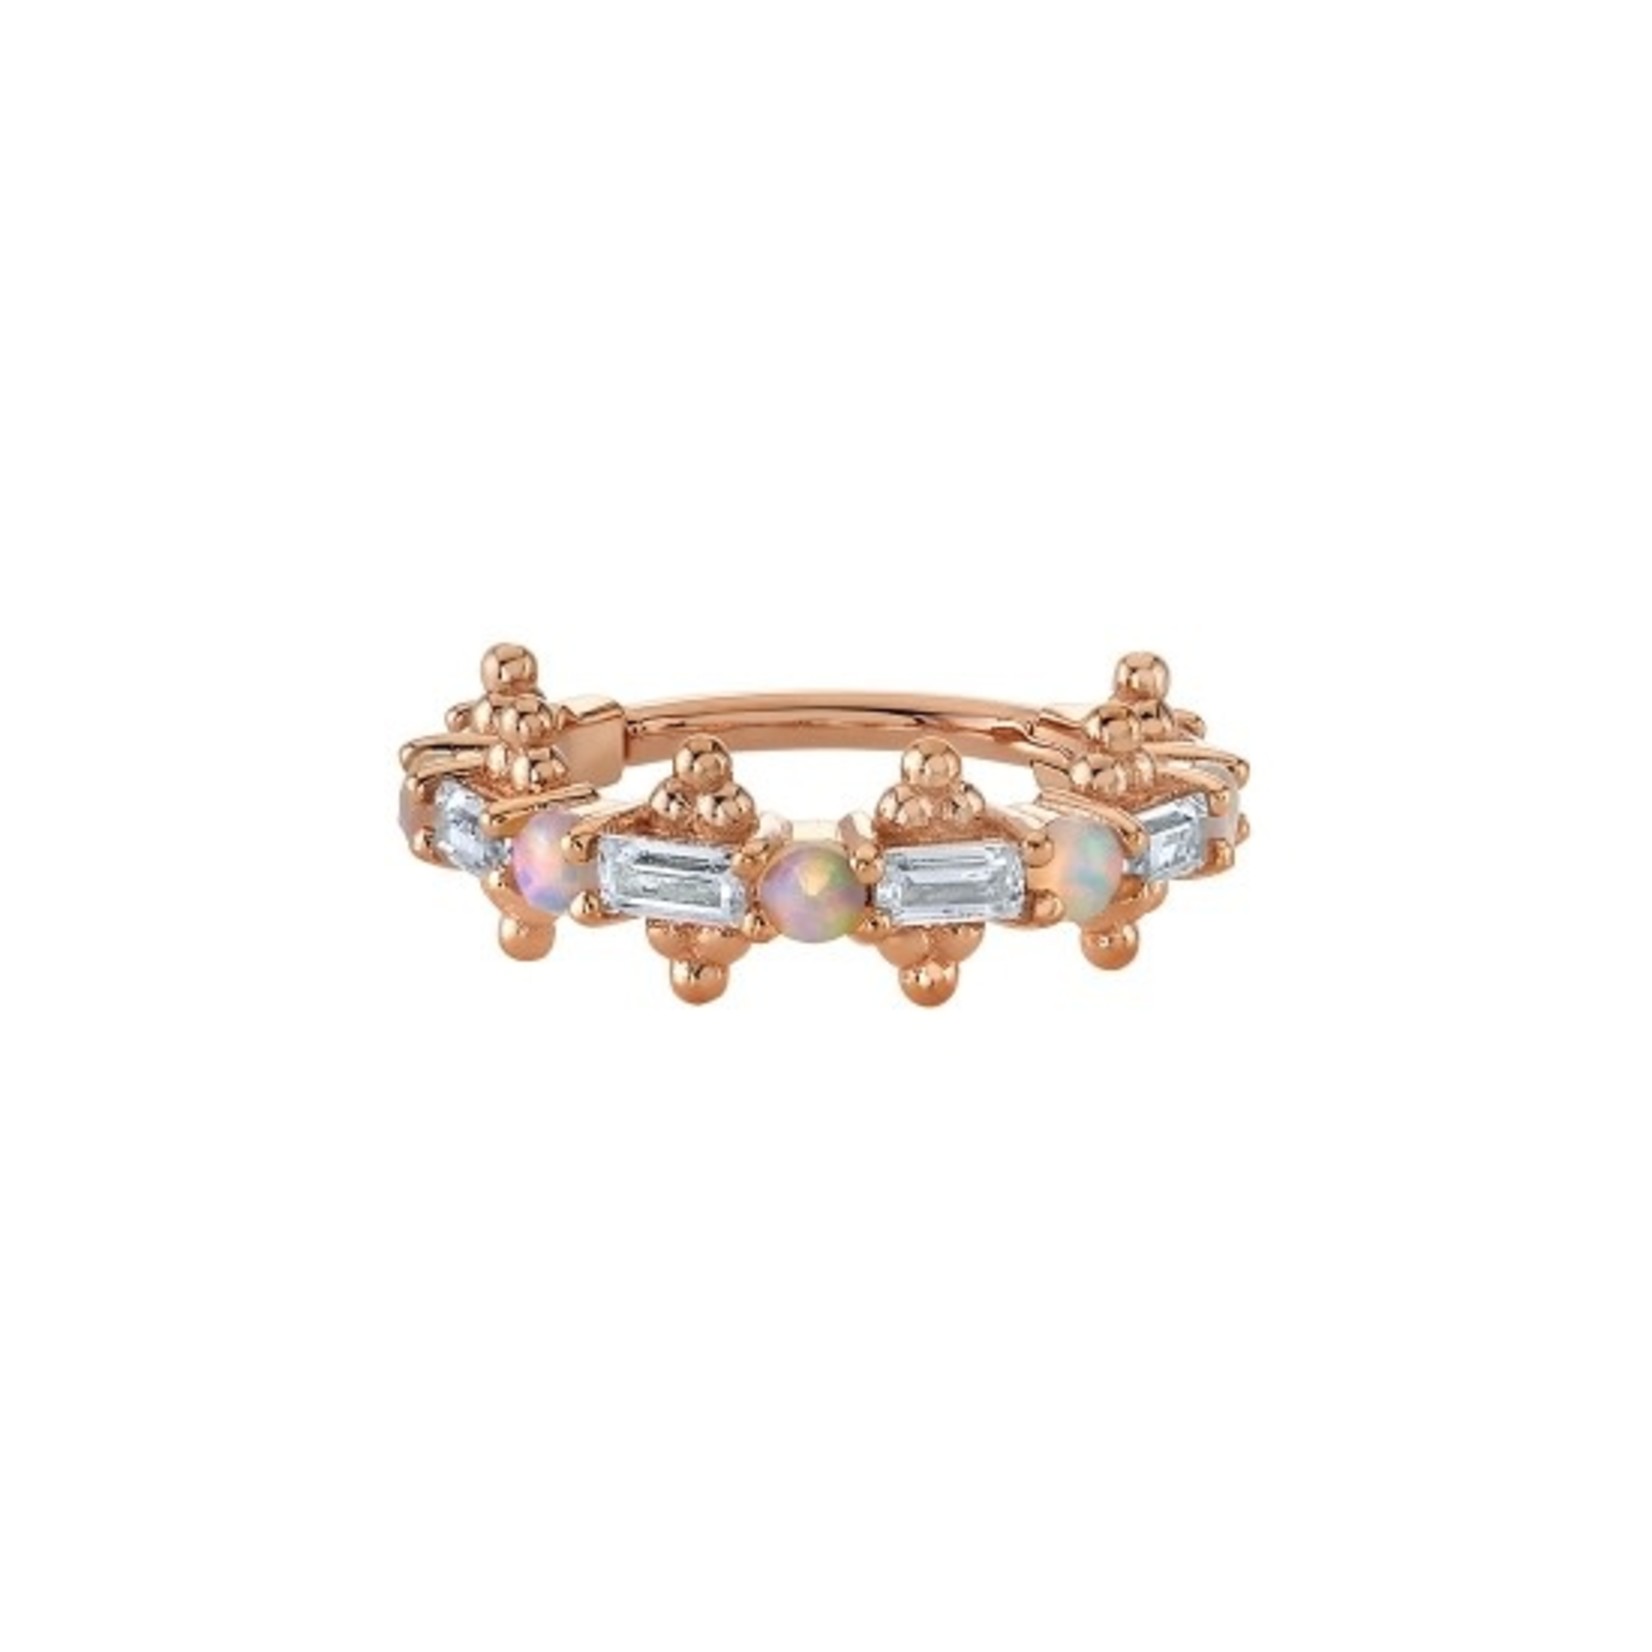 BVLA 16g 7/16 BVLA rose gold "Closer" clicker with 6x 3x1.5 AA white sapphire baguettes and 5x 2.0 AAA white opals